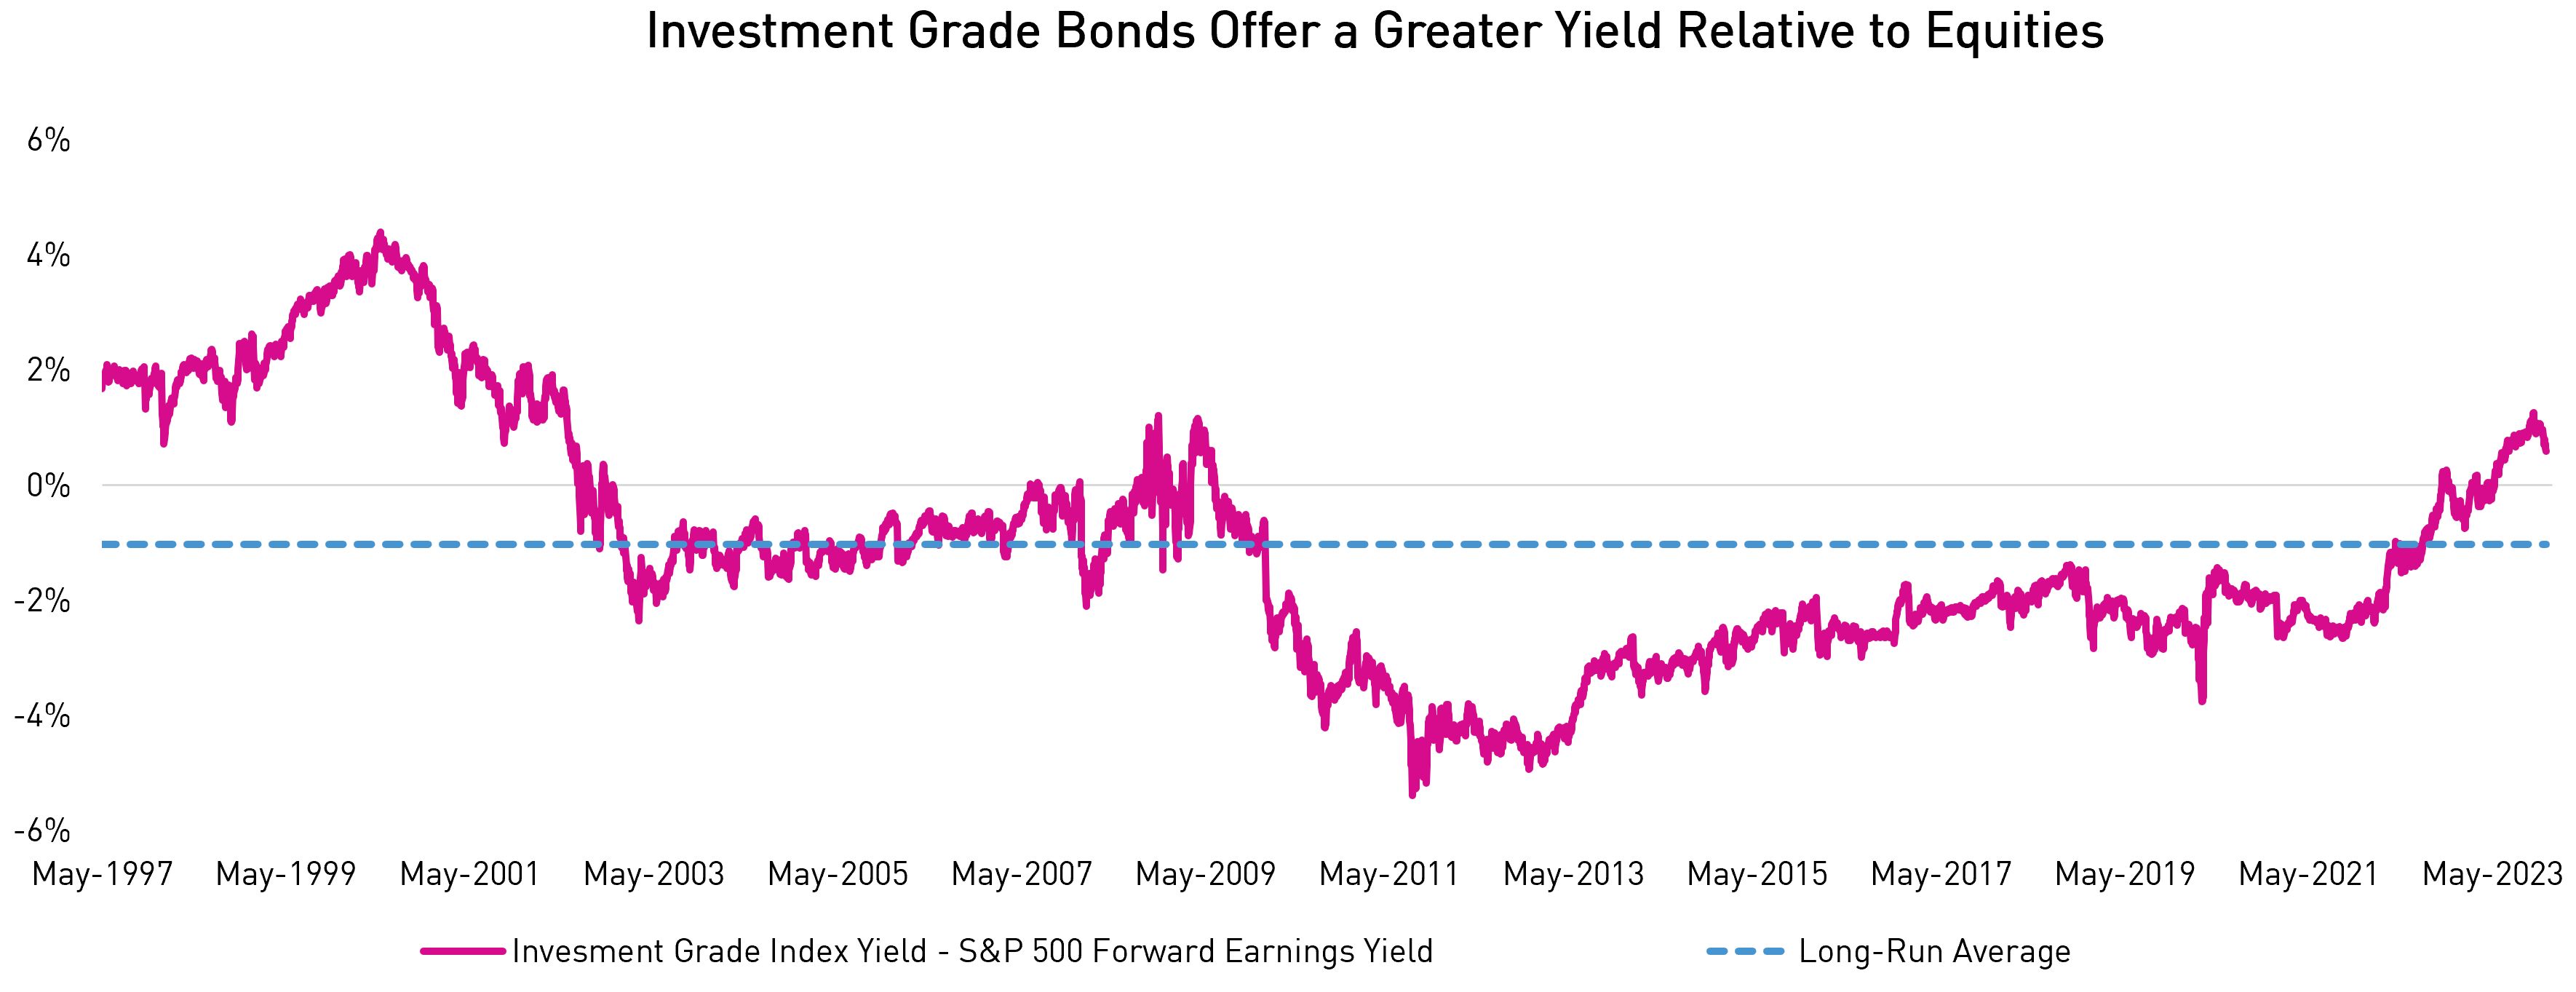 Line Chart Showing Investment Grade Bonds Offer a Greater Yield Relative to Equities